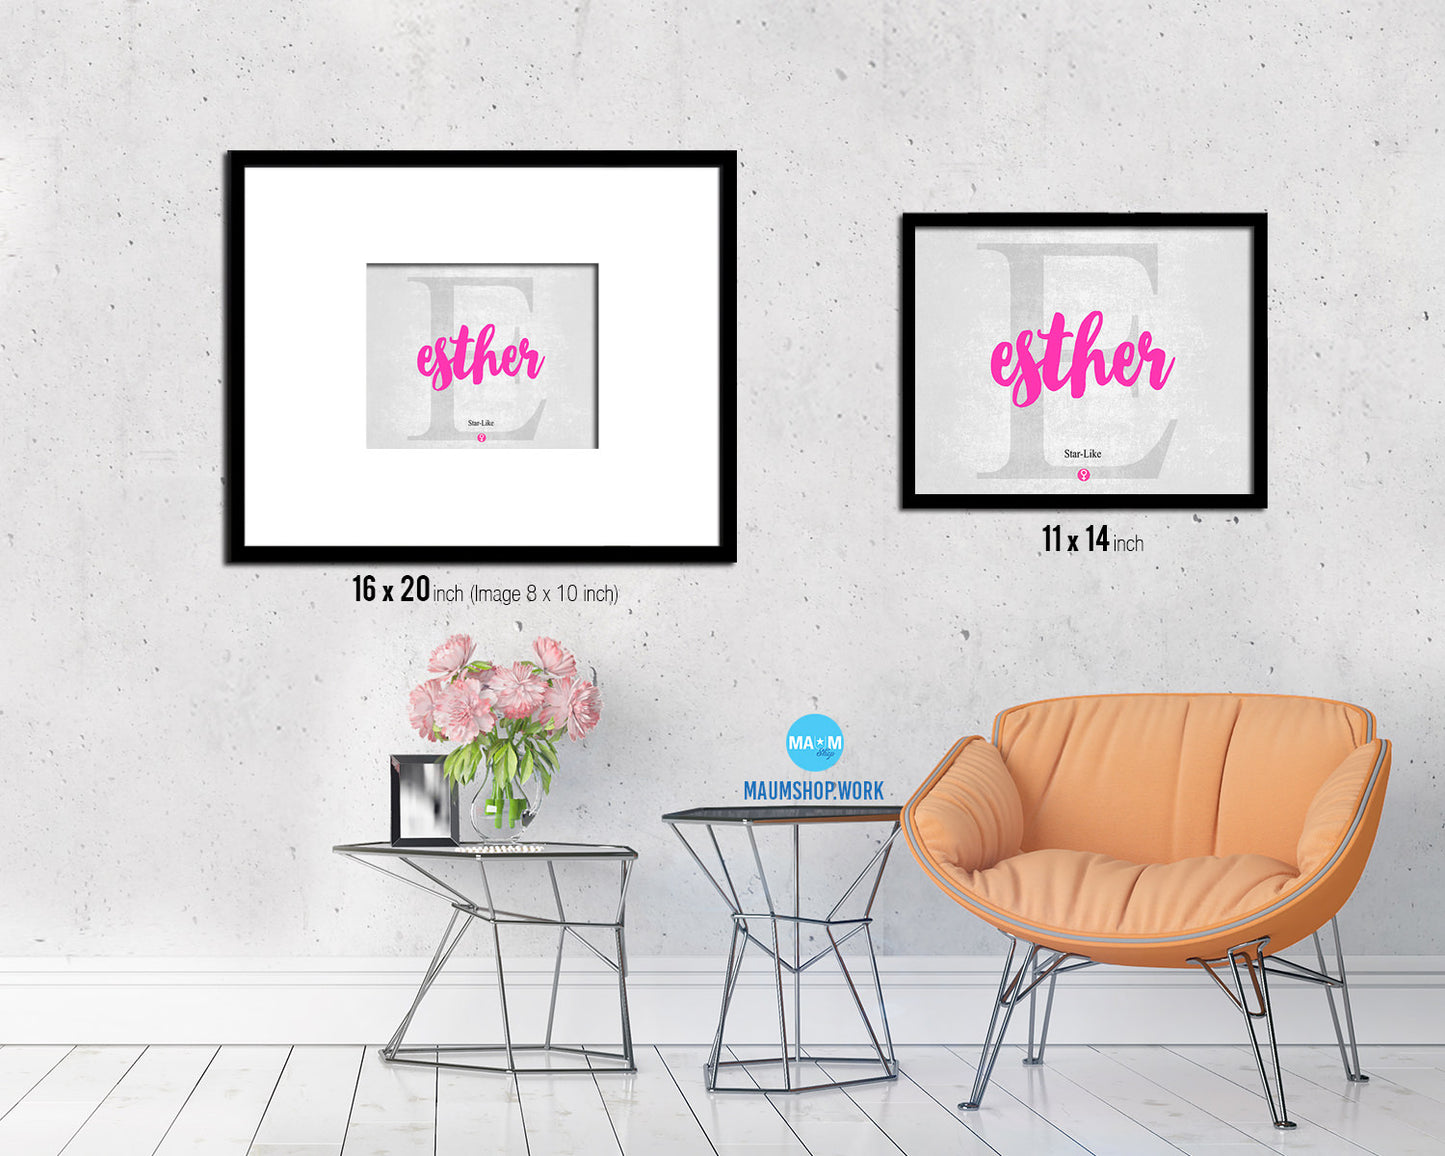 Esther Personalized Biblical Name Plate Art Framed Print Kids Baby Room Wall Decor Gifts